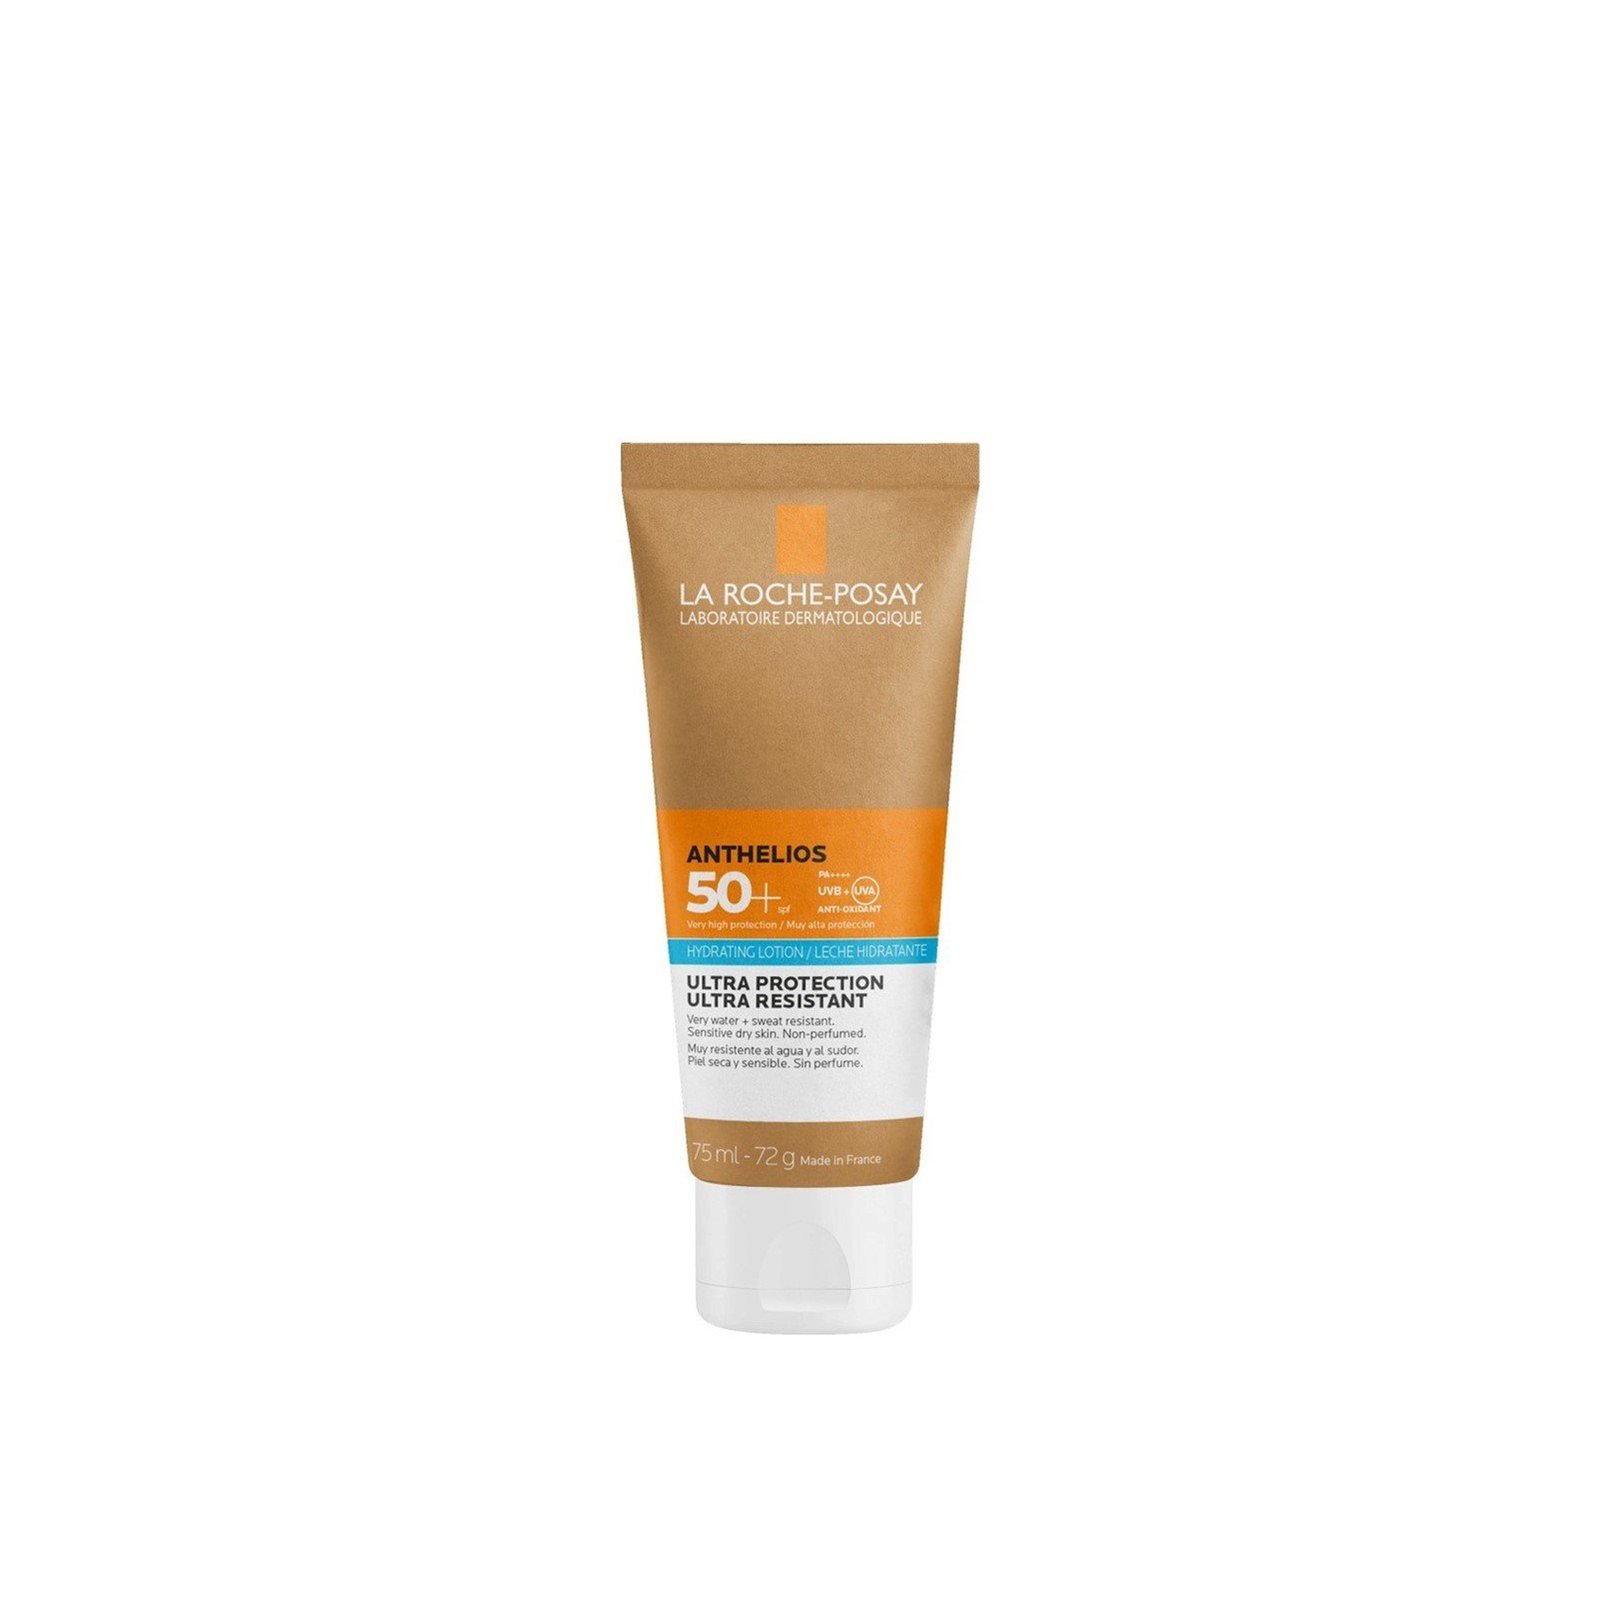 La Roche-Posay Anthelios Hydrating Lotion Eco-Tube SPF50+ 75ml